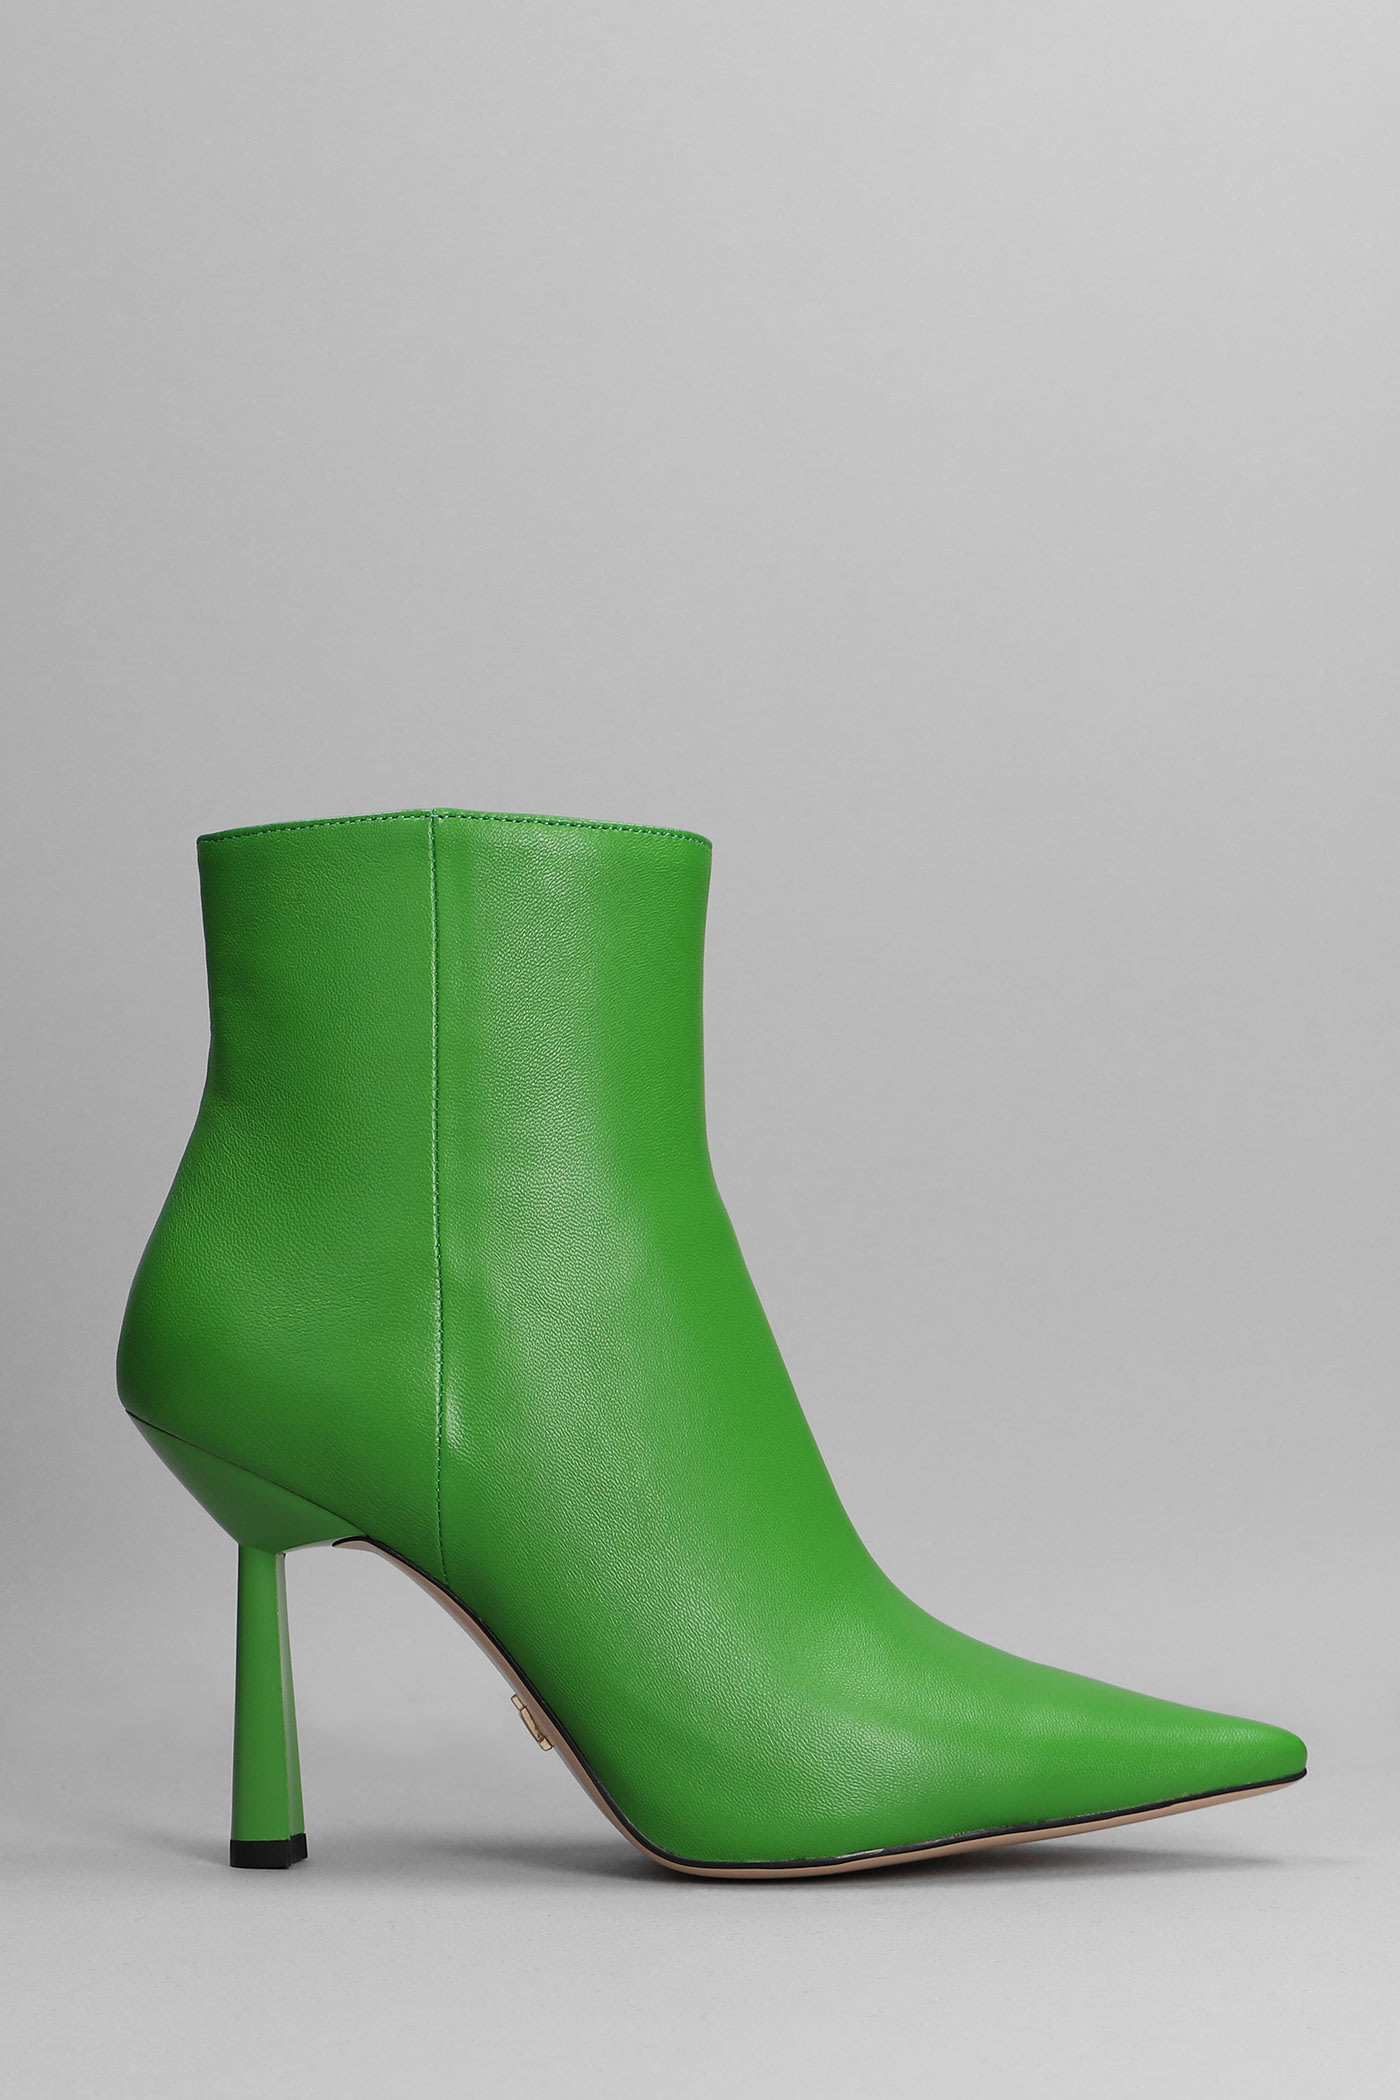 Lola Cruz High Heels Ankle Boots In Green Leather